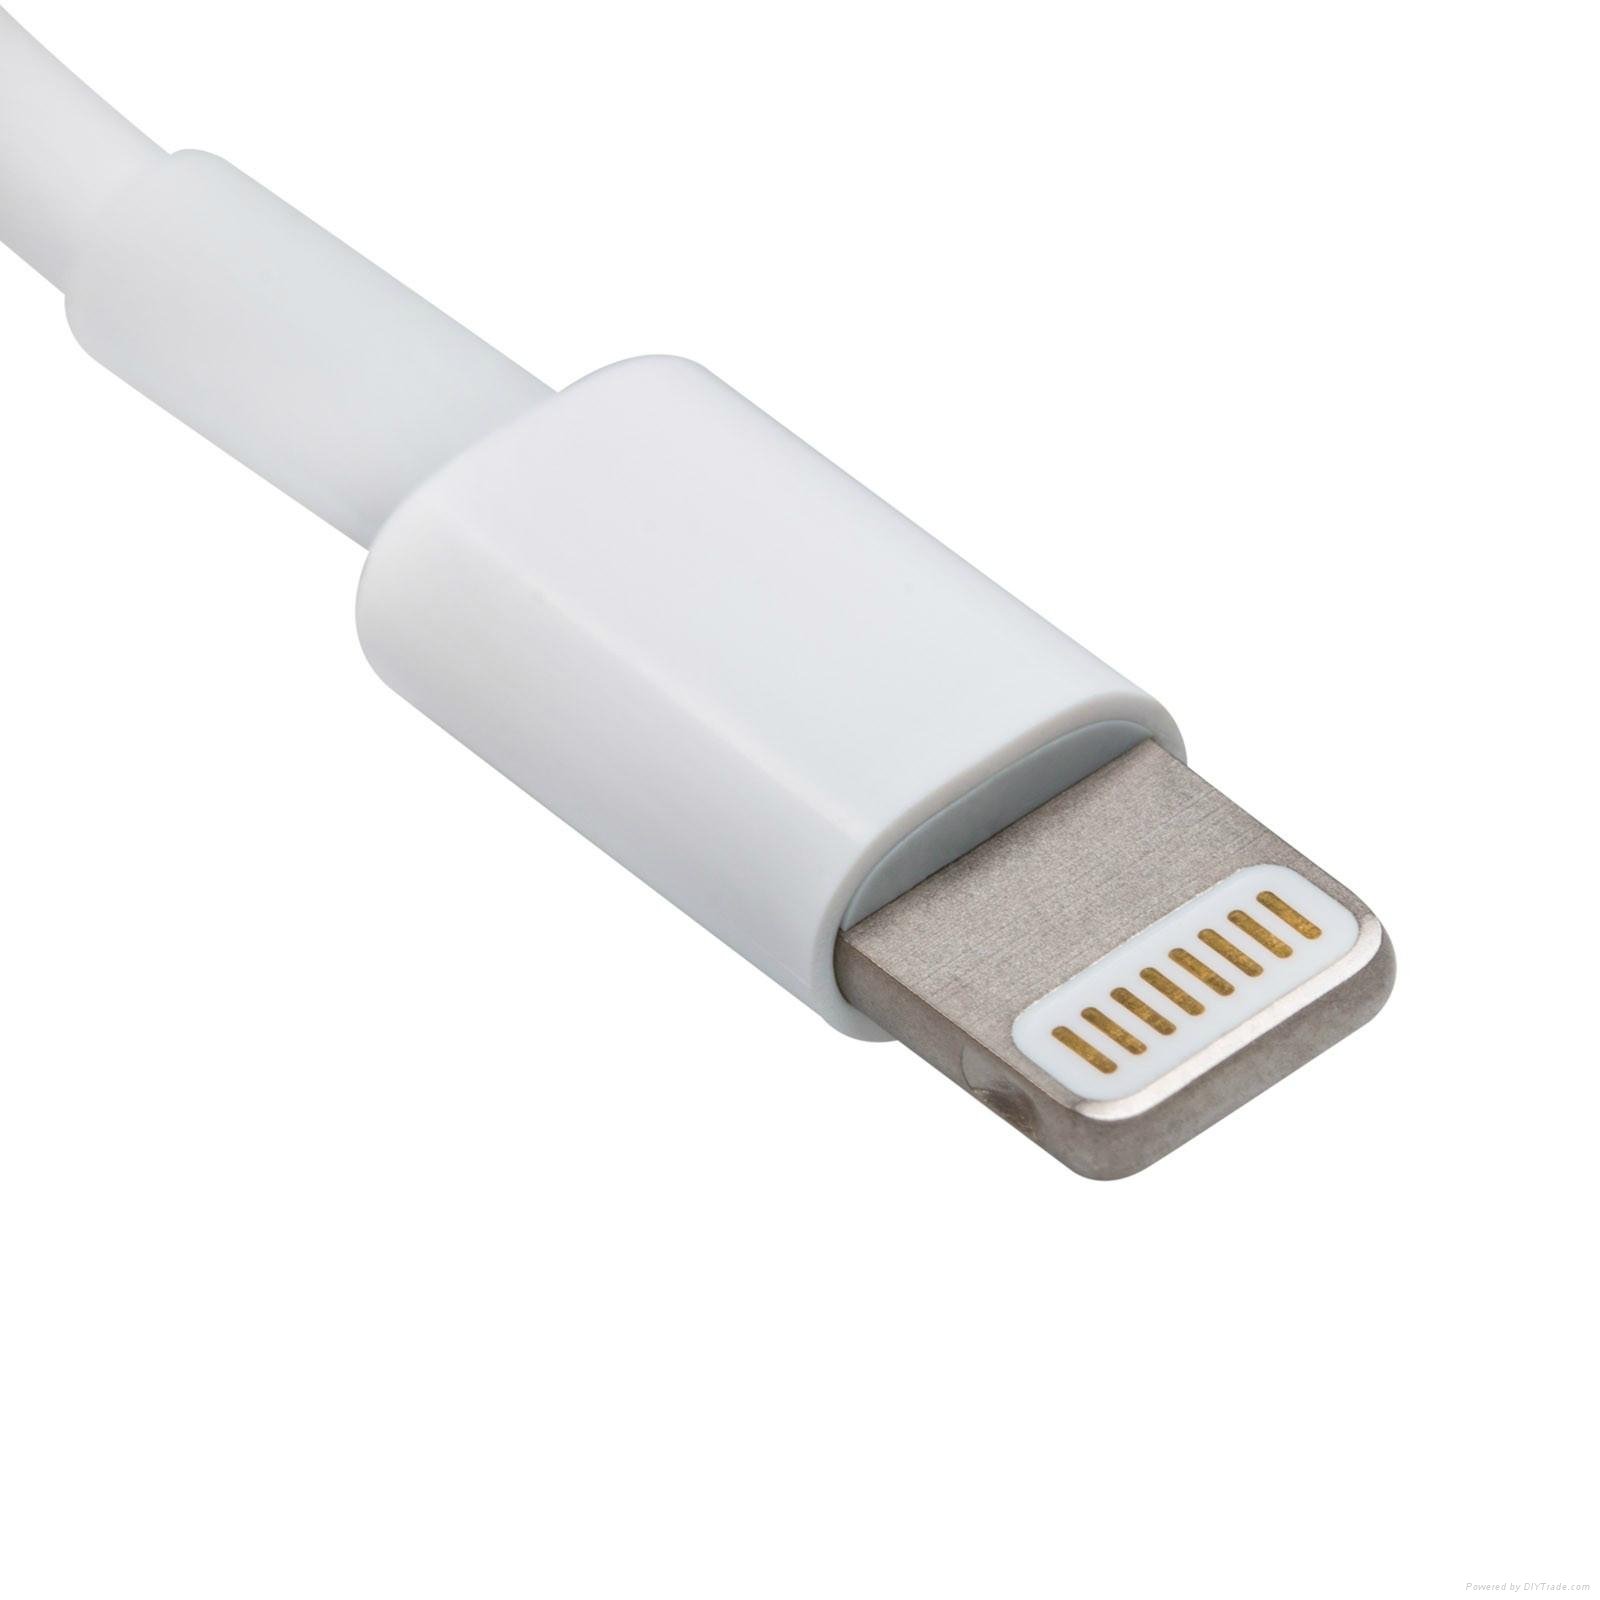 ORIGINAL OFFICIAL APPLE IPhone 5 / 5S /5C Lightning USB Charger Data Cable White 4